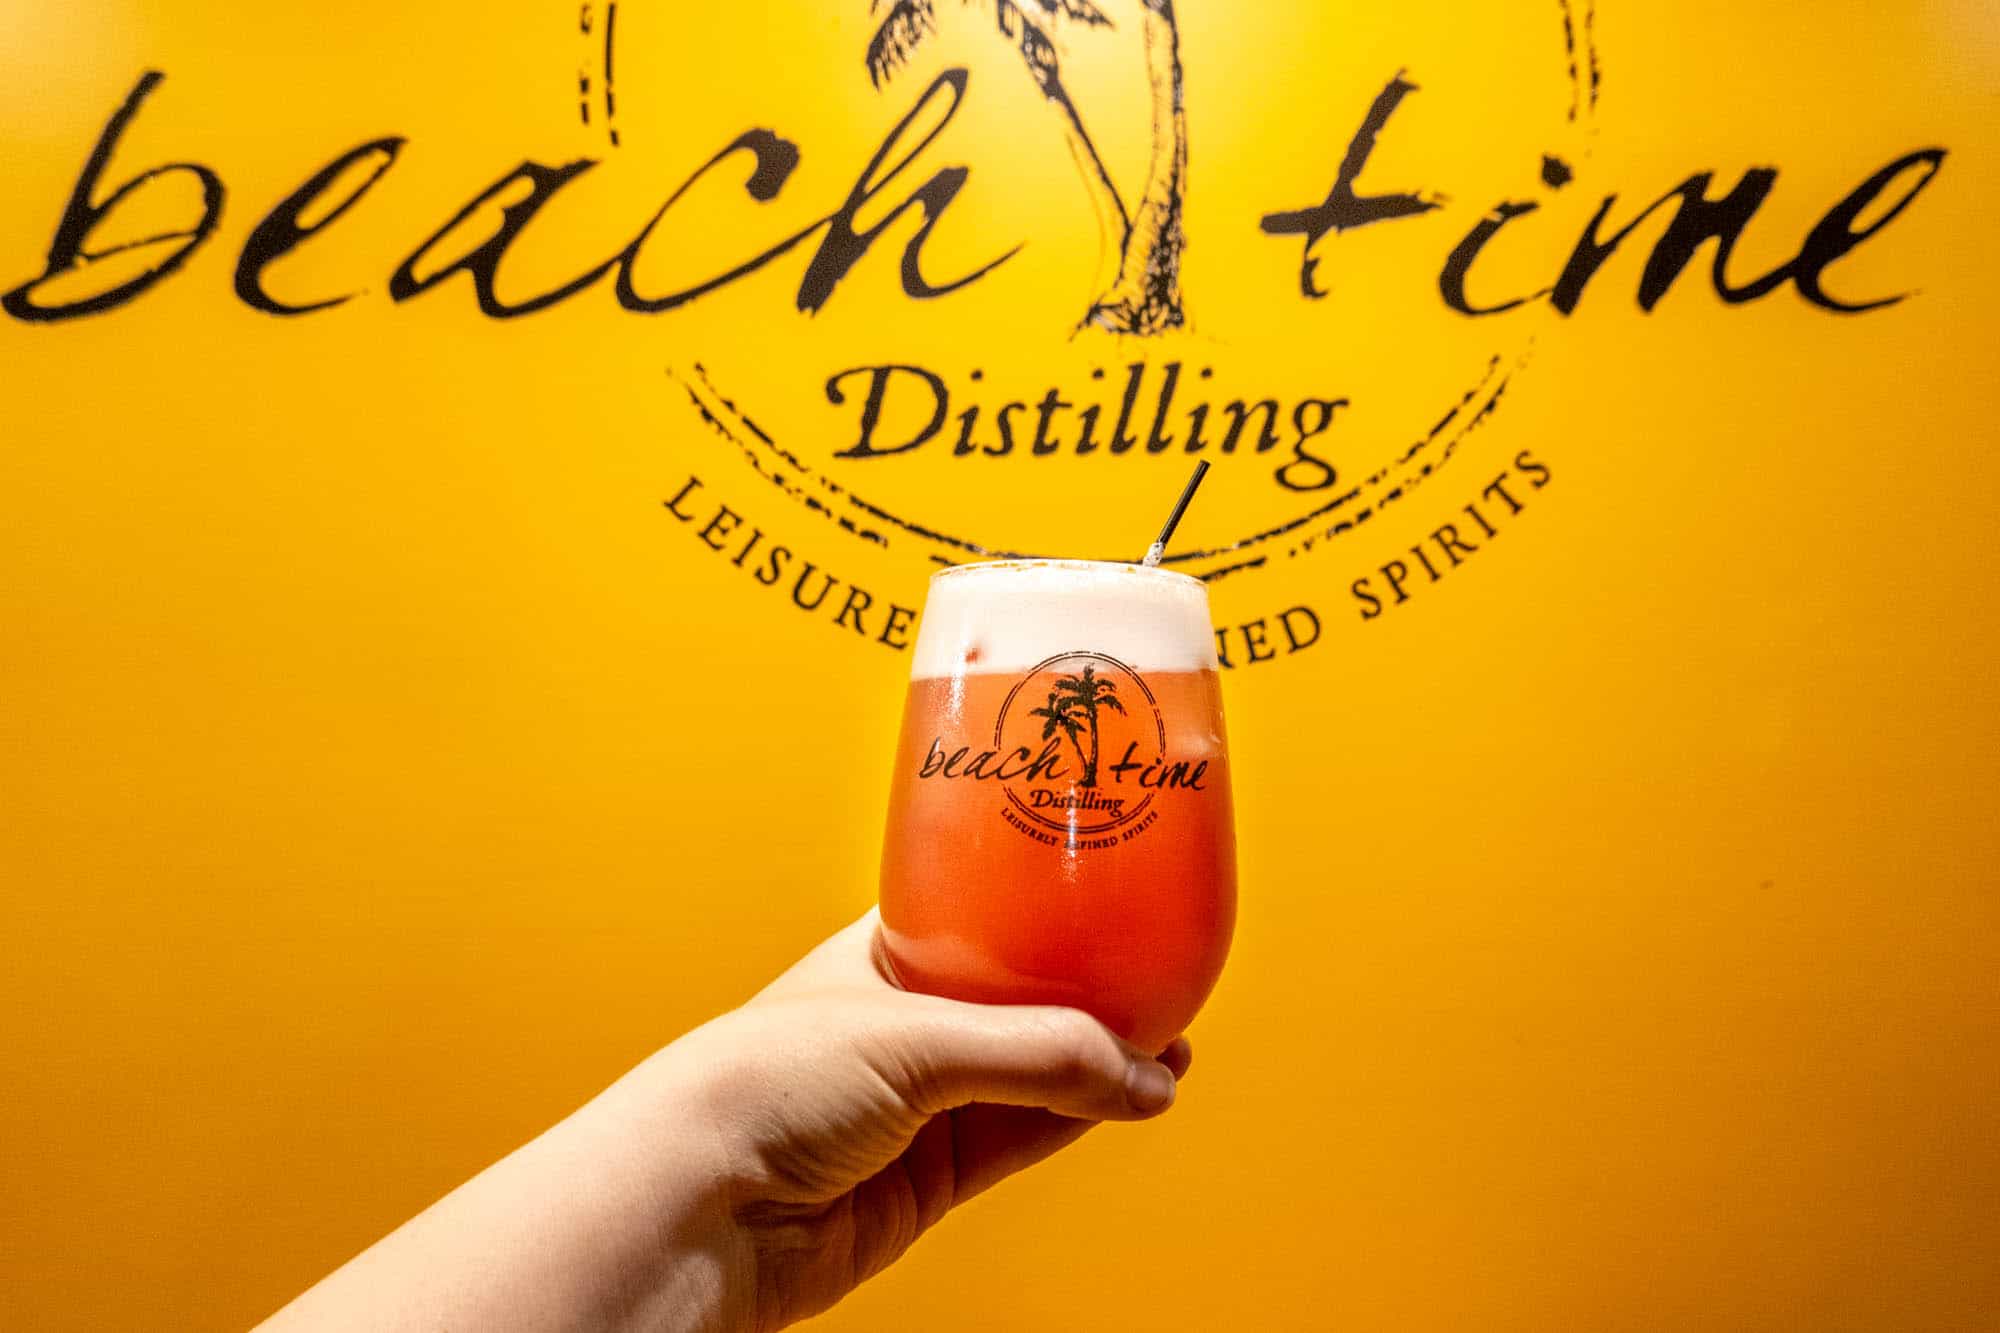 Hand holding a cocktail in front of a sign for "Beach Time Distilling"